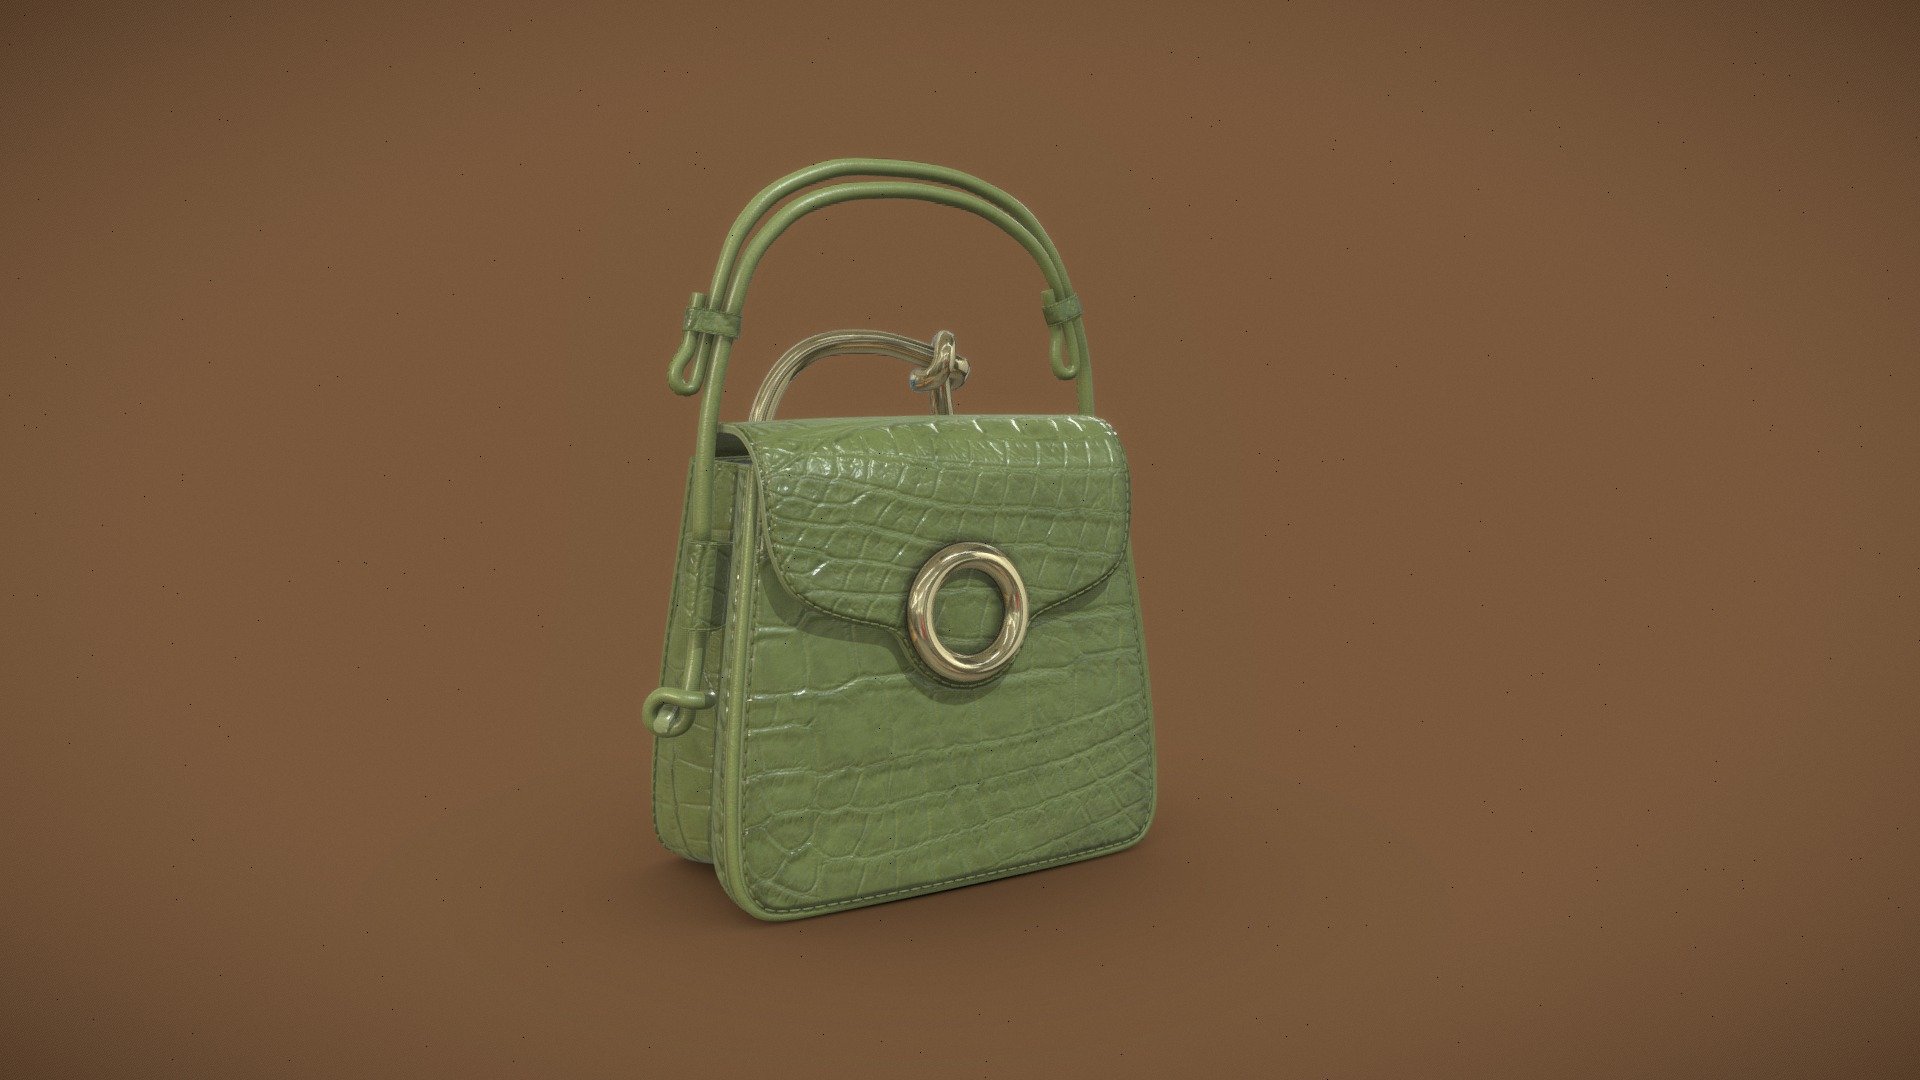 I present you my latest project - a mini bag designed by me. The model is created in Autodesk Maya and textured in Substance Painter. My main inspiration was the ongoing trend of minibags, mixed up with crocodile leather in fun color and playful hardware 3d model